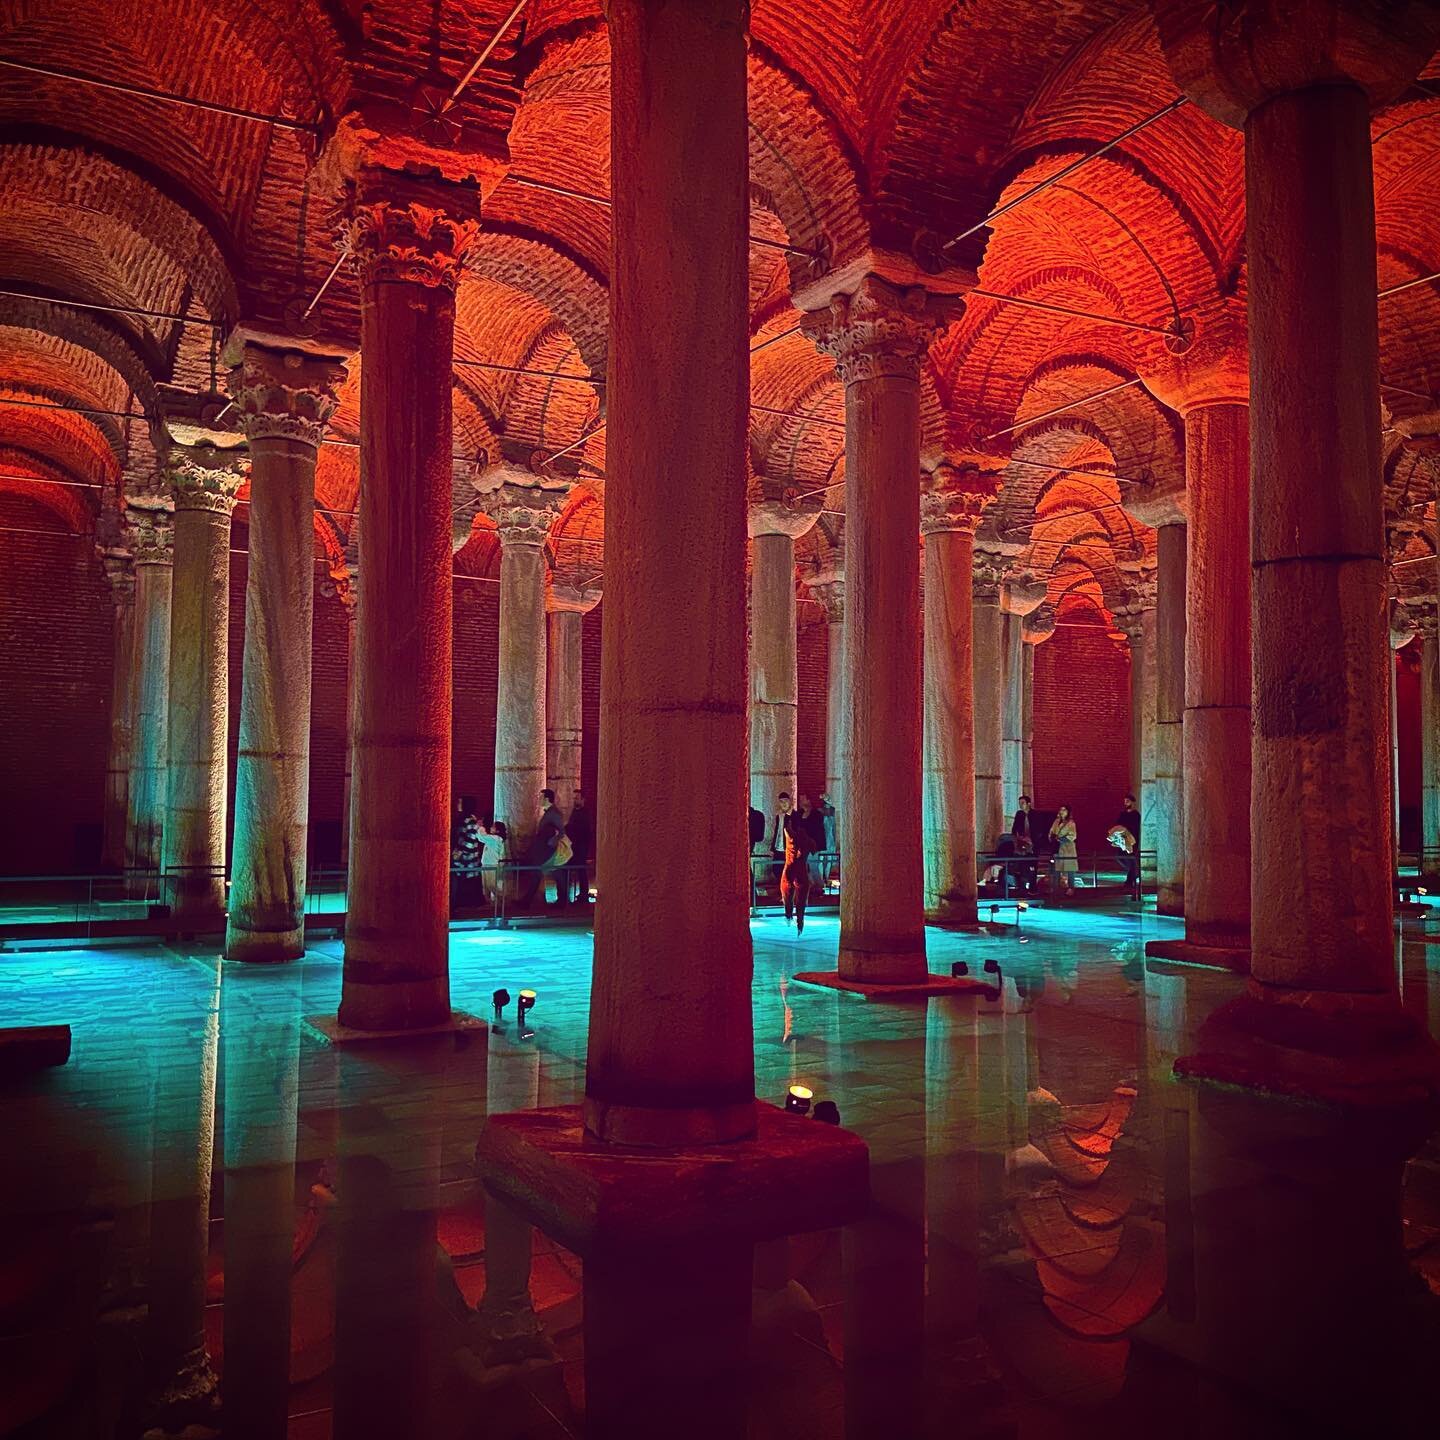 Basilica Cistern, Istanbul. An incredible feat of Roman construction